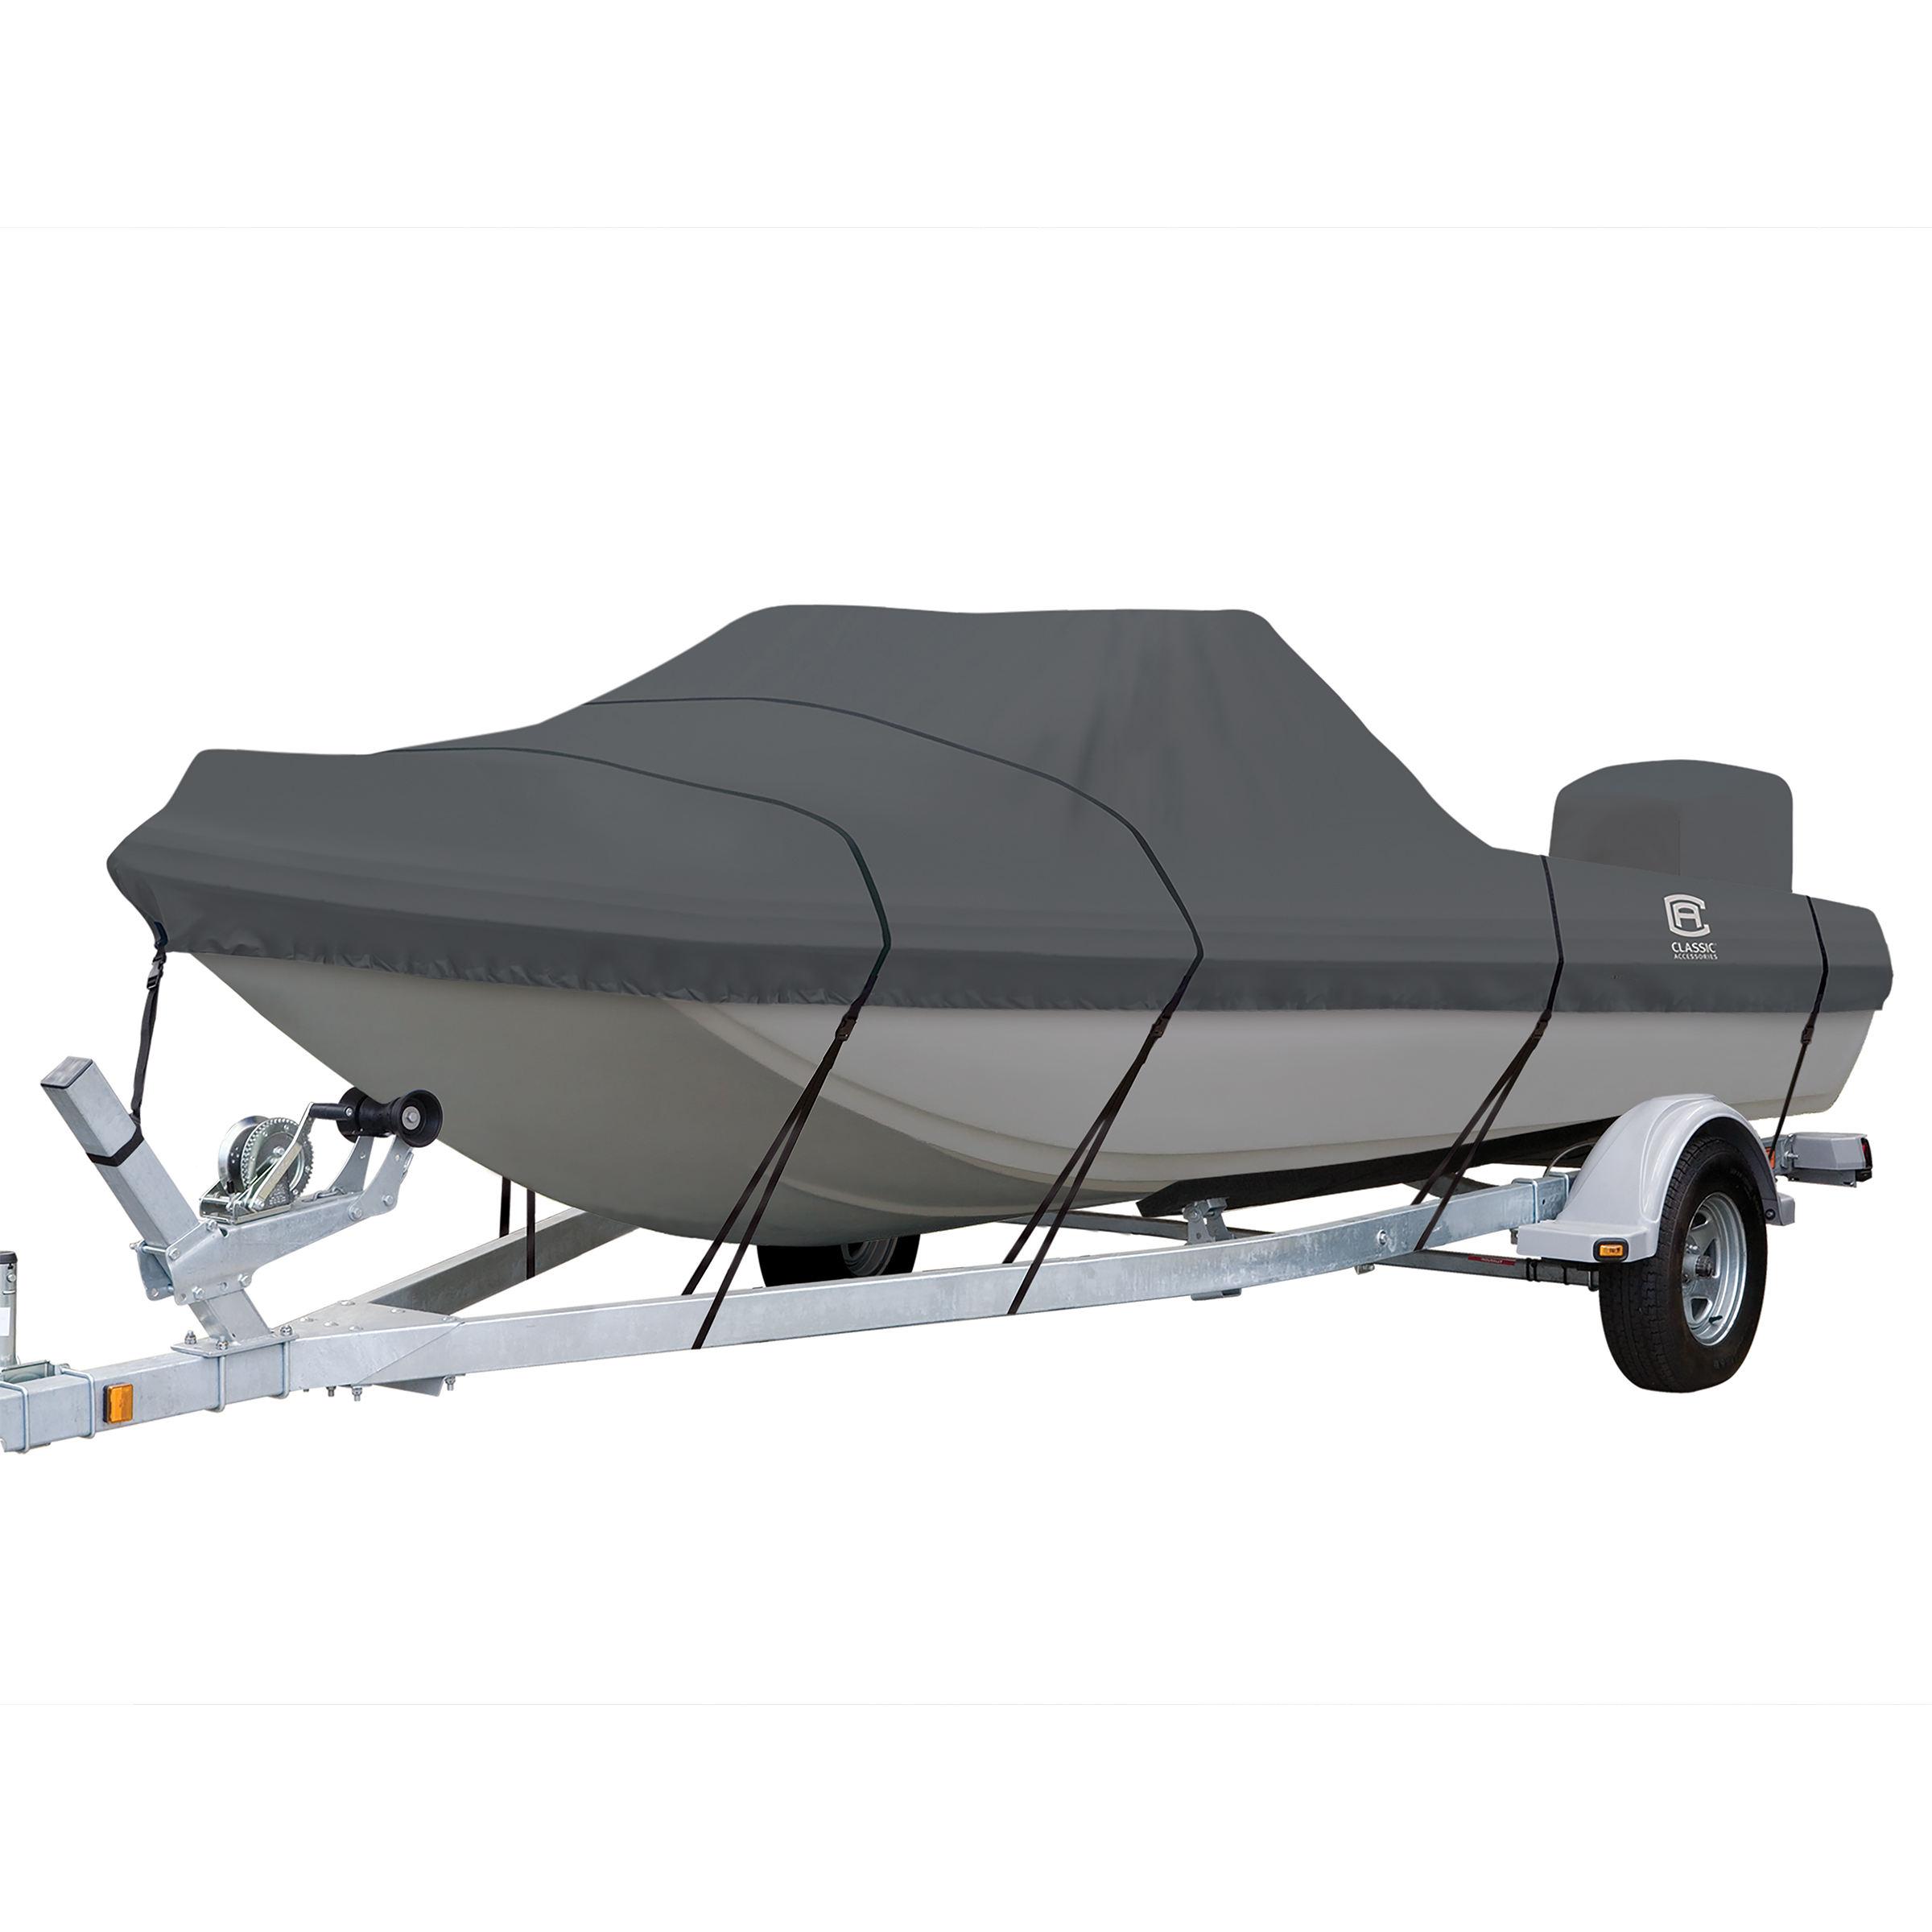 Classic Accessories Tri-Hull Outboard Cover, Support Pole, Fits Boats 210"-222"x92", Model D3